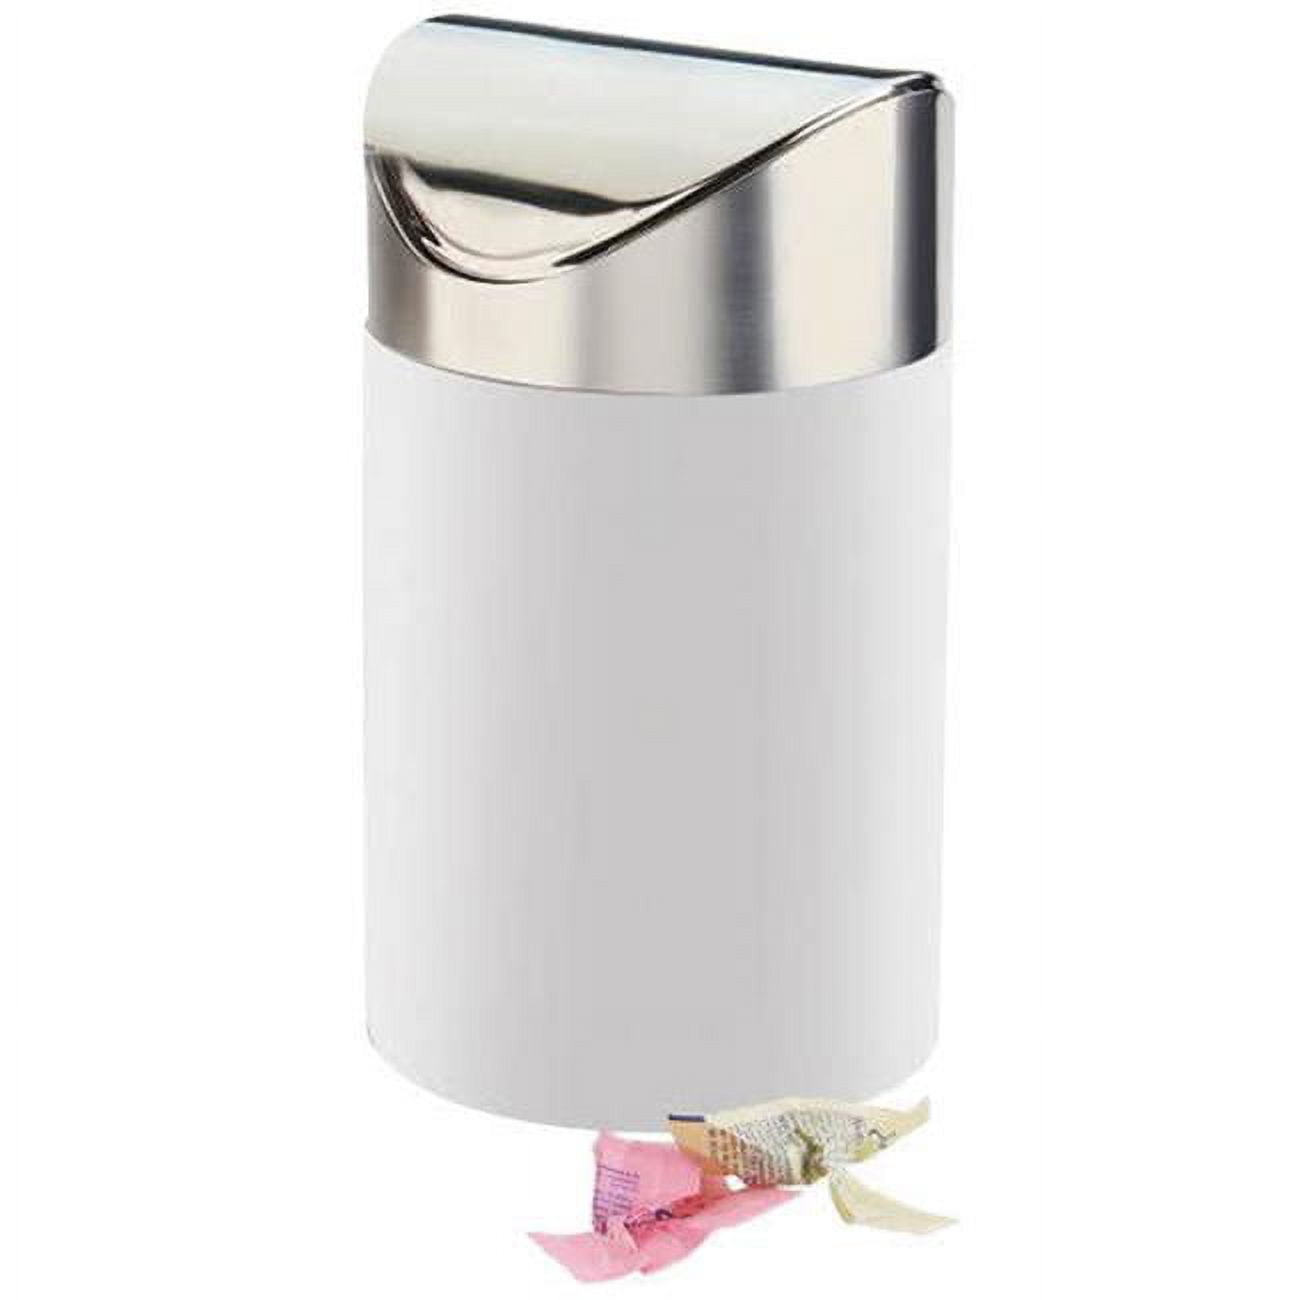 Picture of Cal Mil 1717-15 Counter Trash Receptacles - White